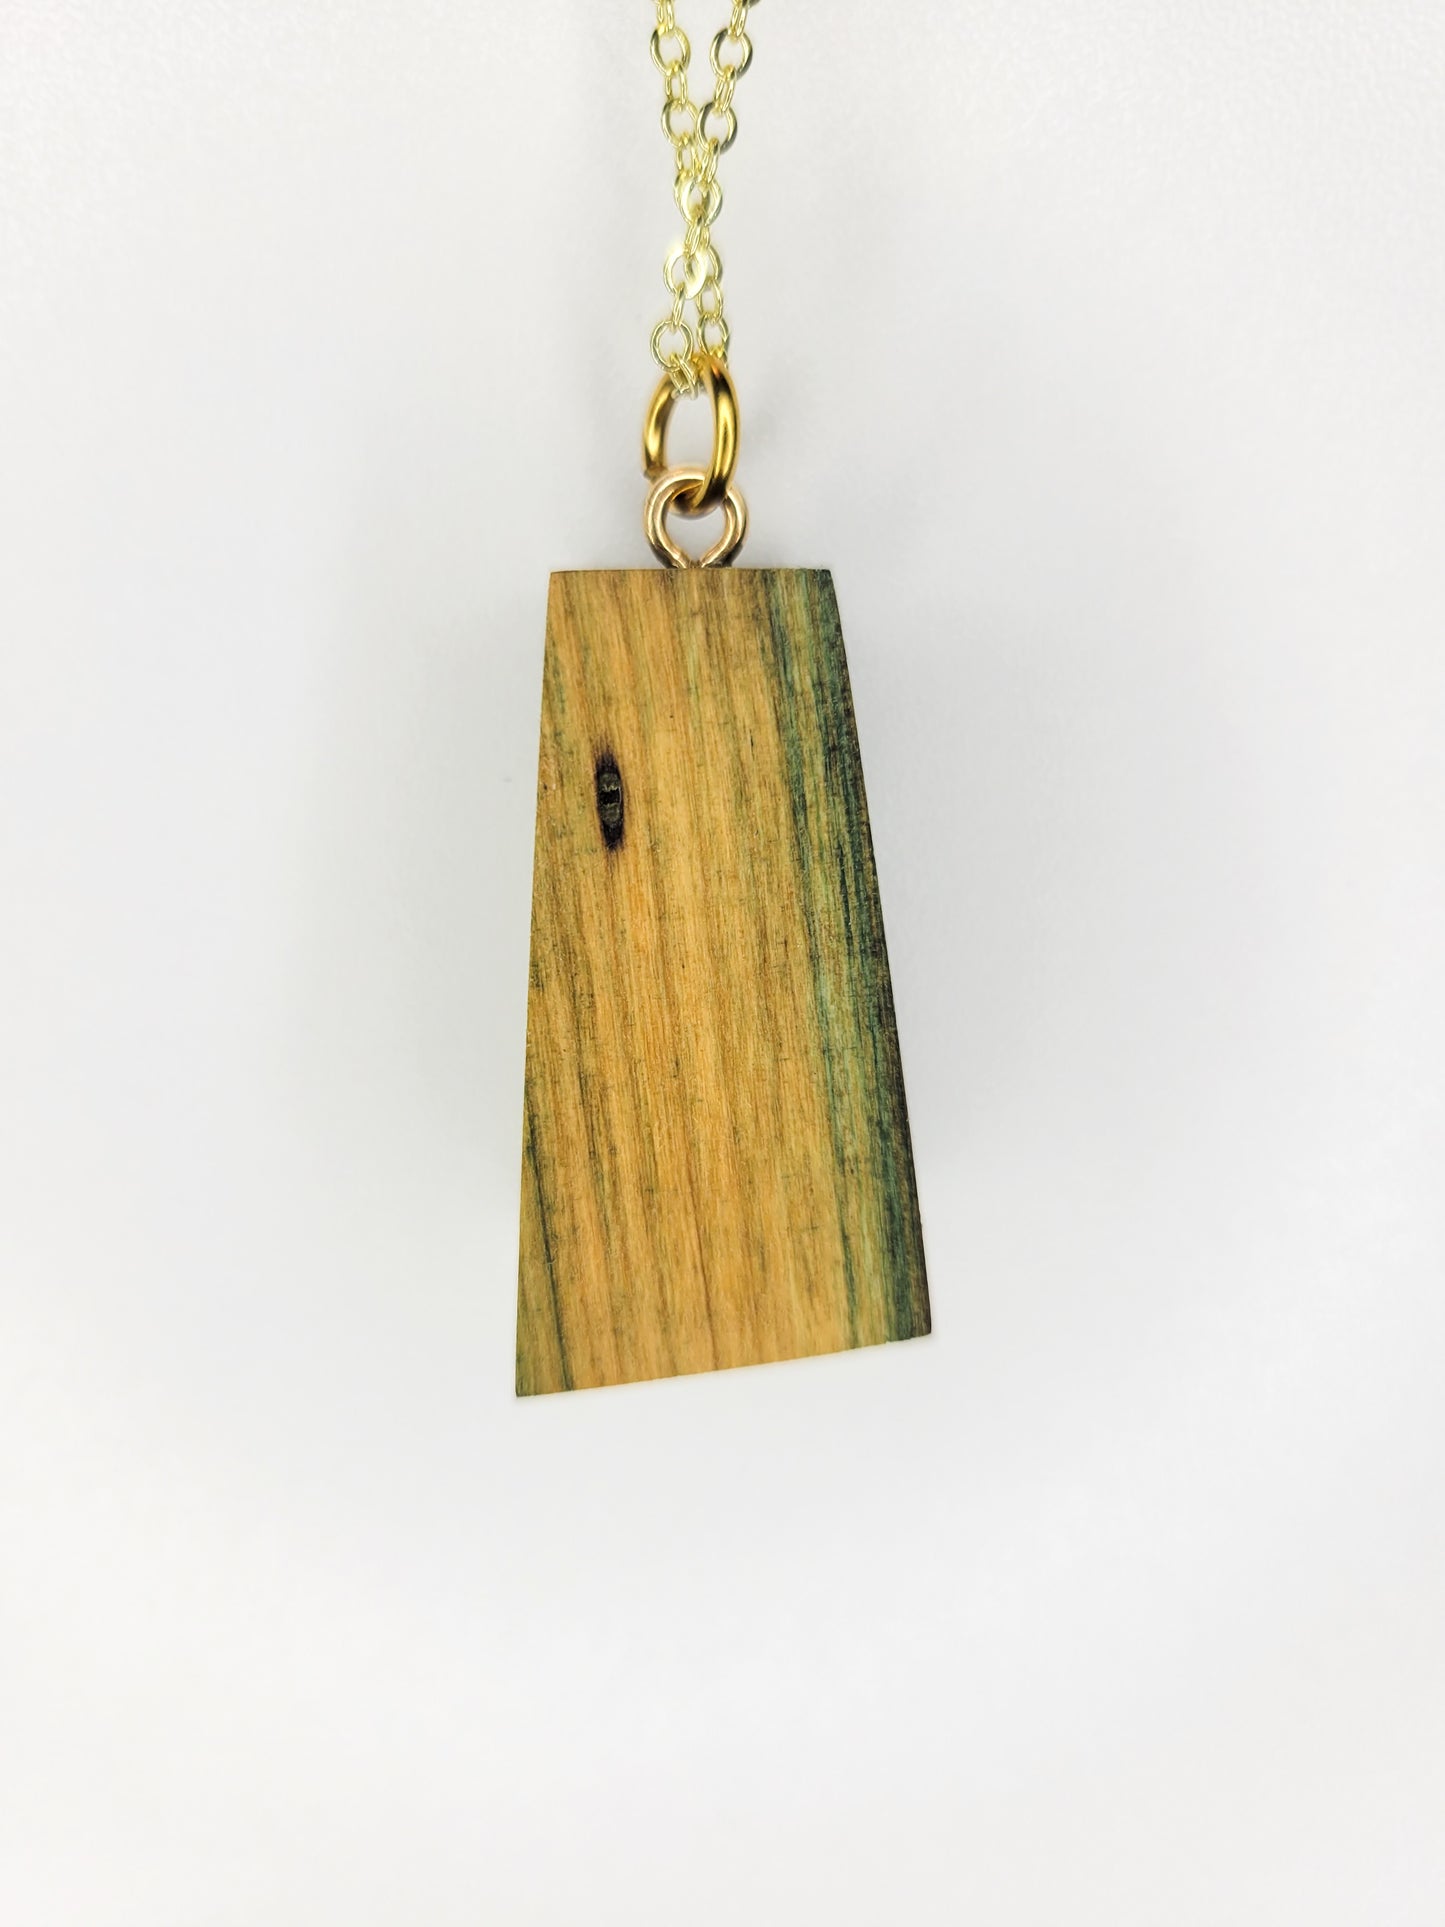 Naturally Fungus-Stained Wooden Pendant